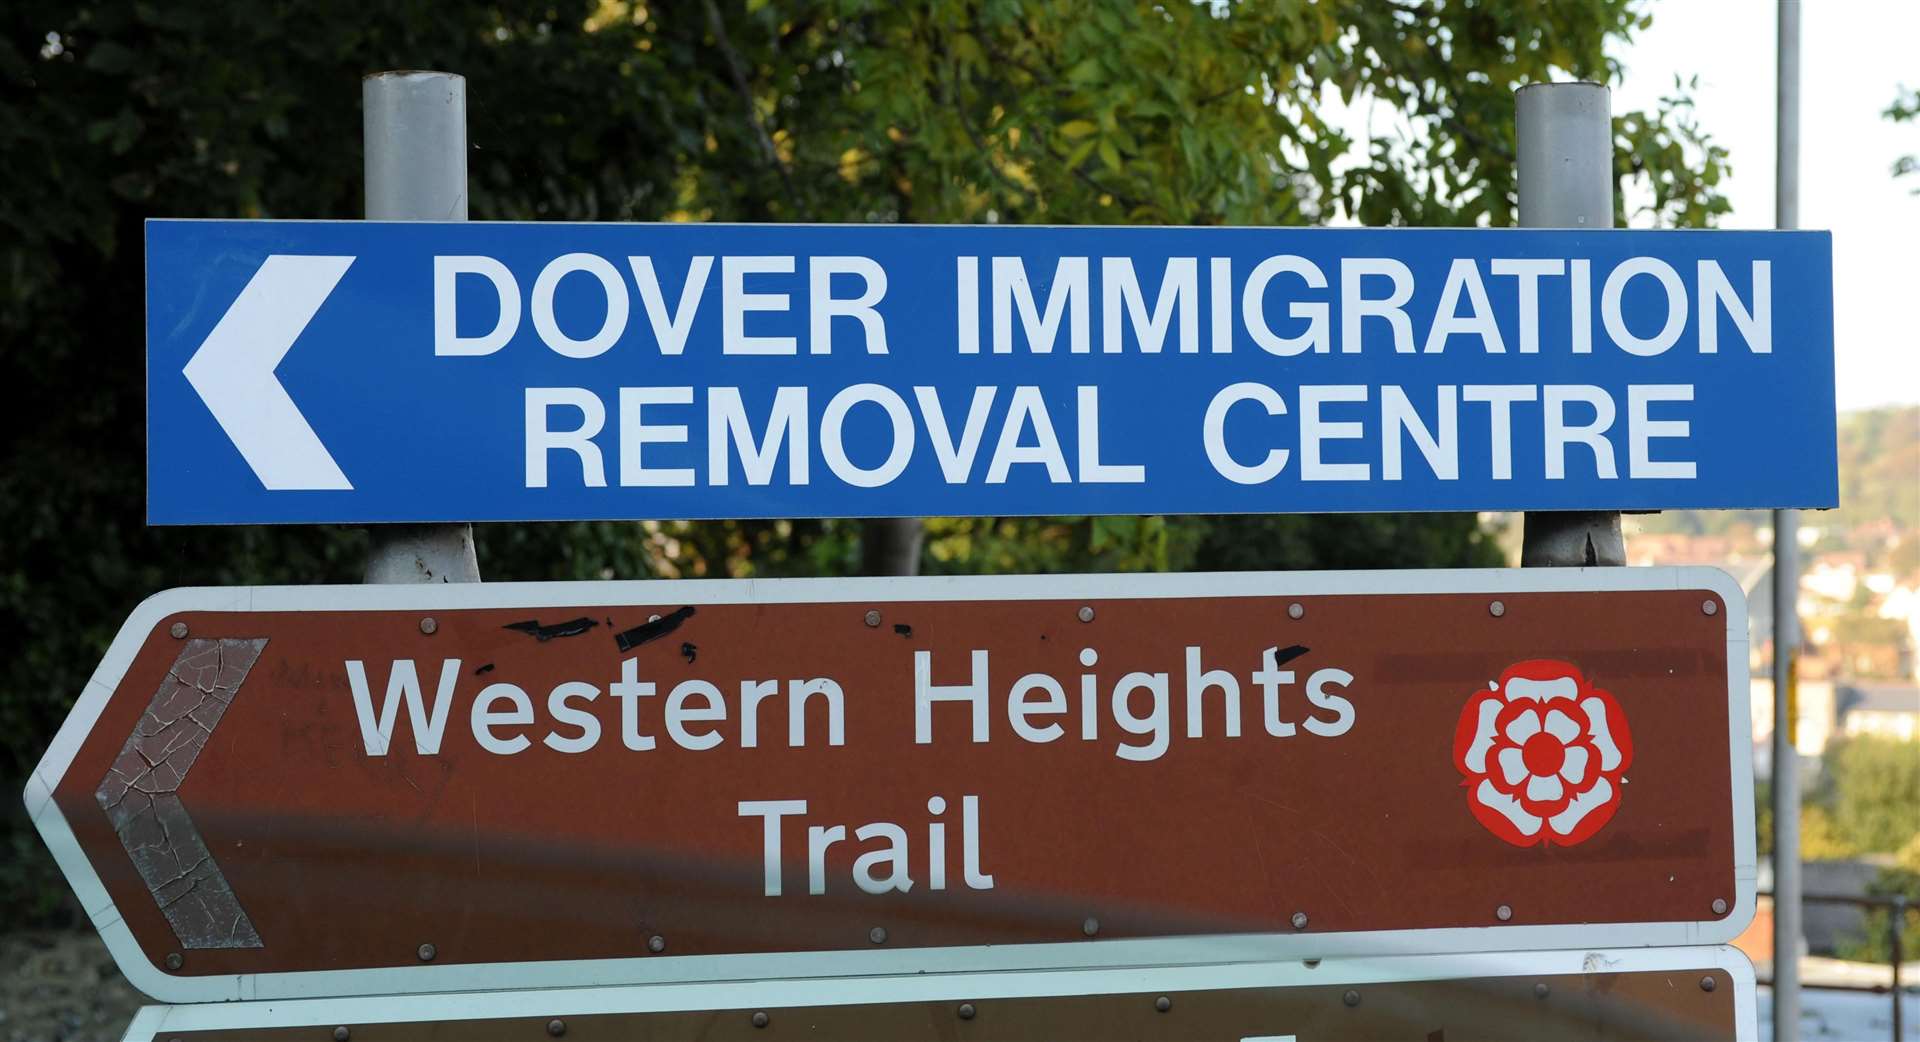 A sign pointing to the entrance to the Dover Immigration Removal Centre (Ian Nicholson/PA)